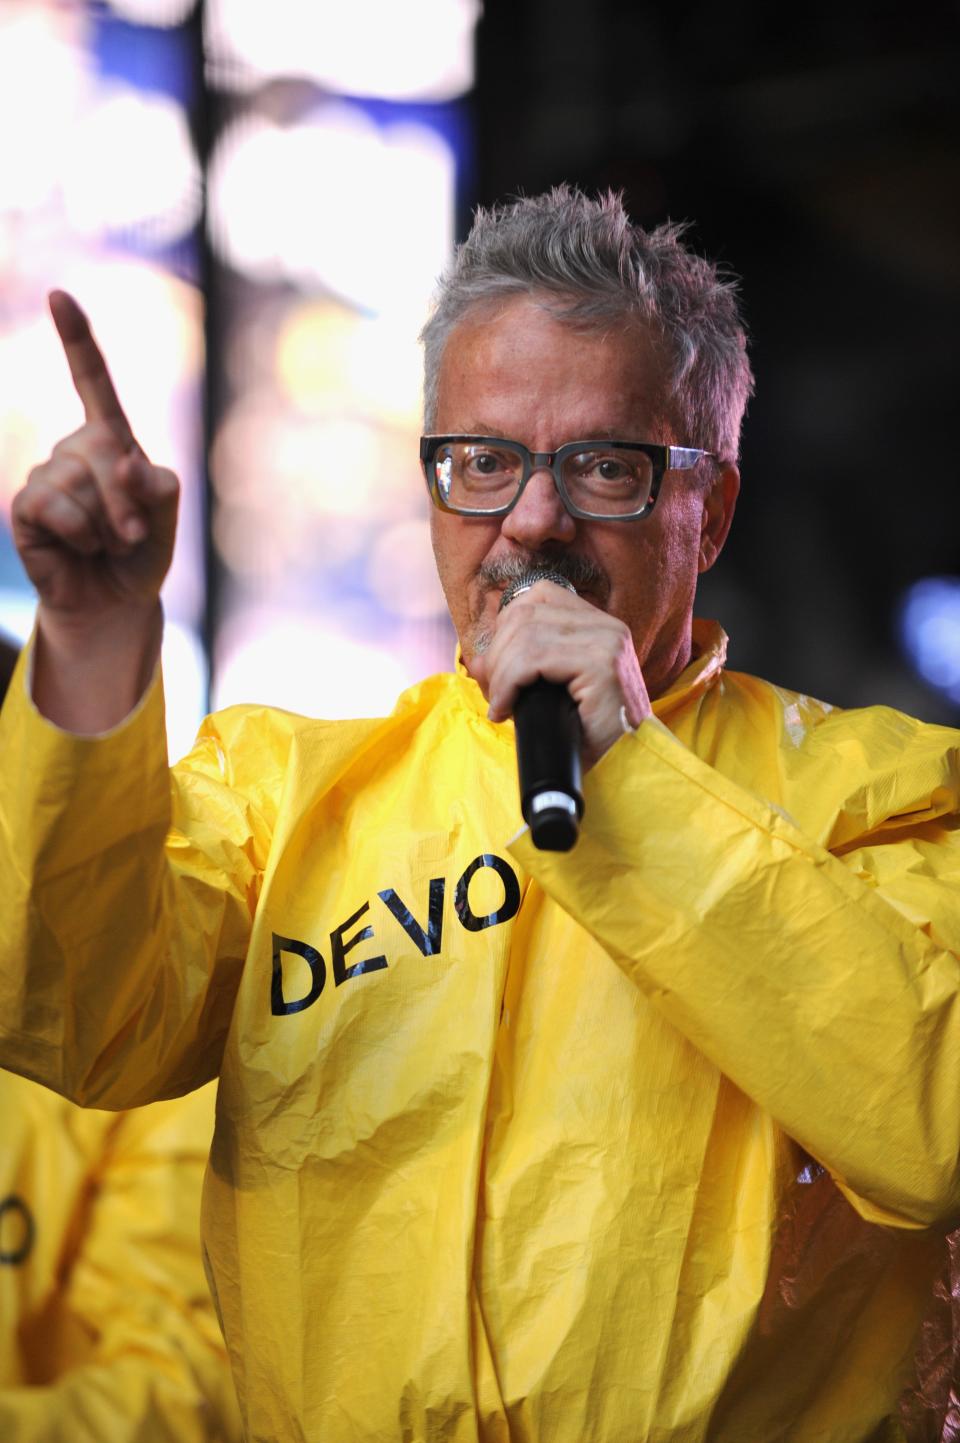 In an interview with the Los Angeles Times published Monday, Mark Mothersbaugh, 70, recalled fighting for his life in the ICU after contracting the coronavirus, which left him on a ventilator and led him to experience dark delusions.